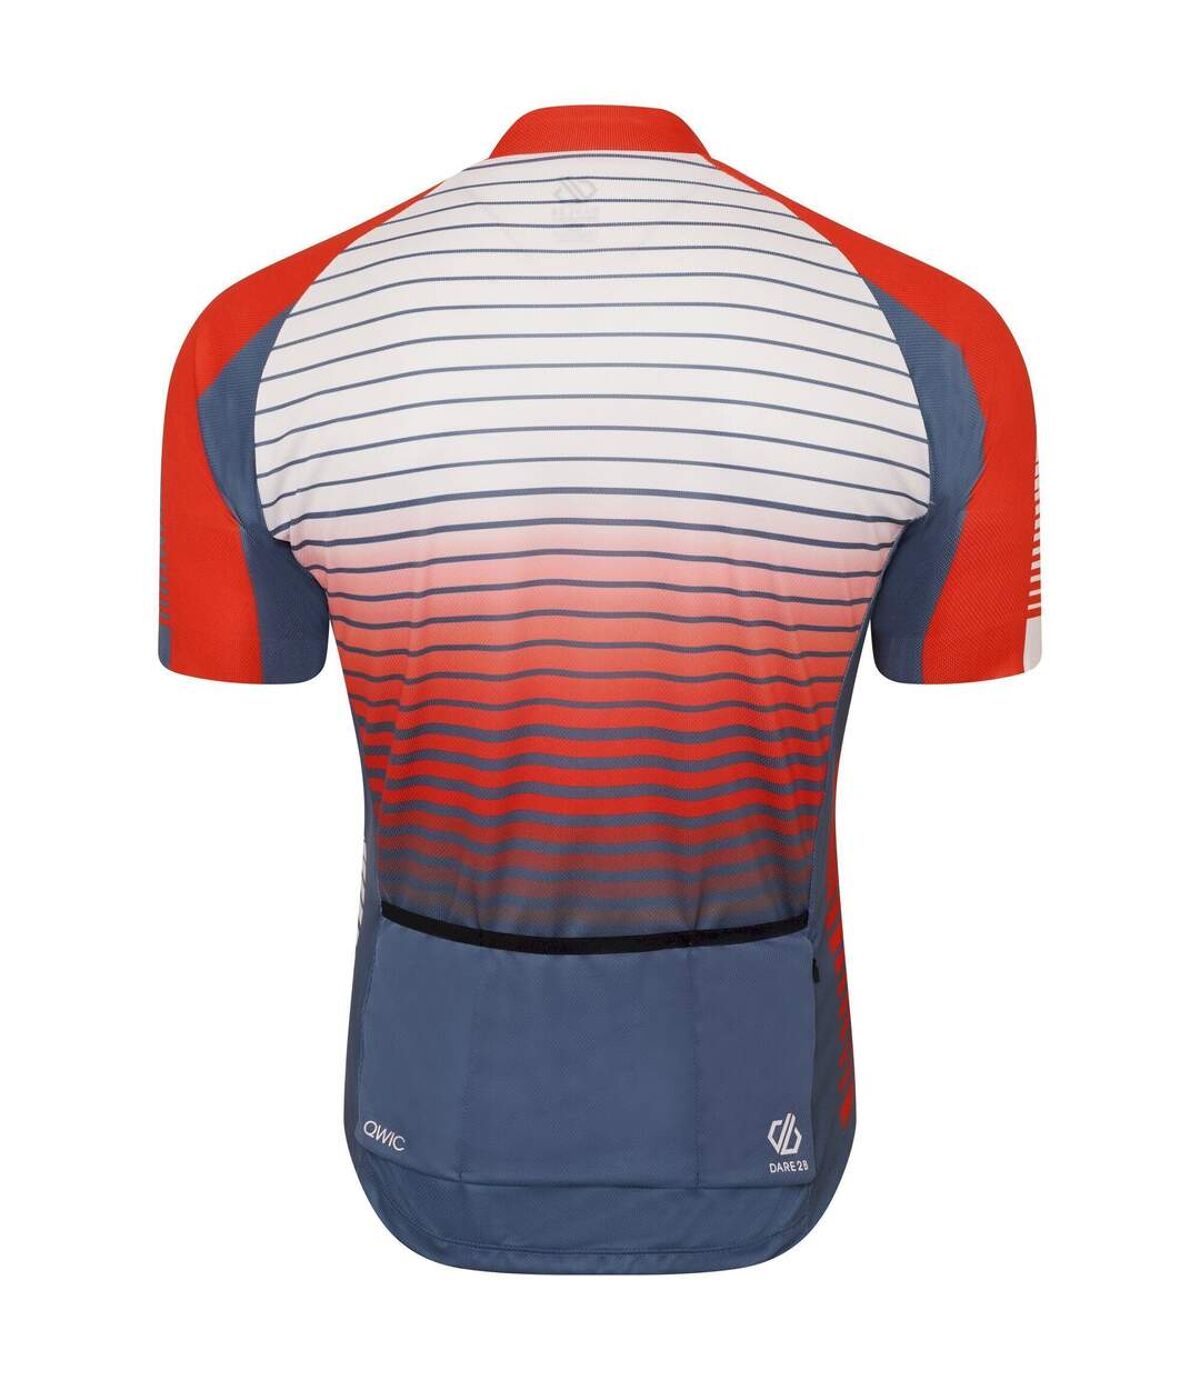 Dare 2B Mens Virtuous AEP Cycling Jersey (Danger Red) - UTRG7233